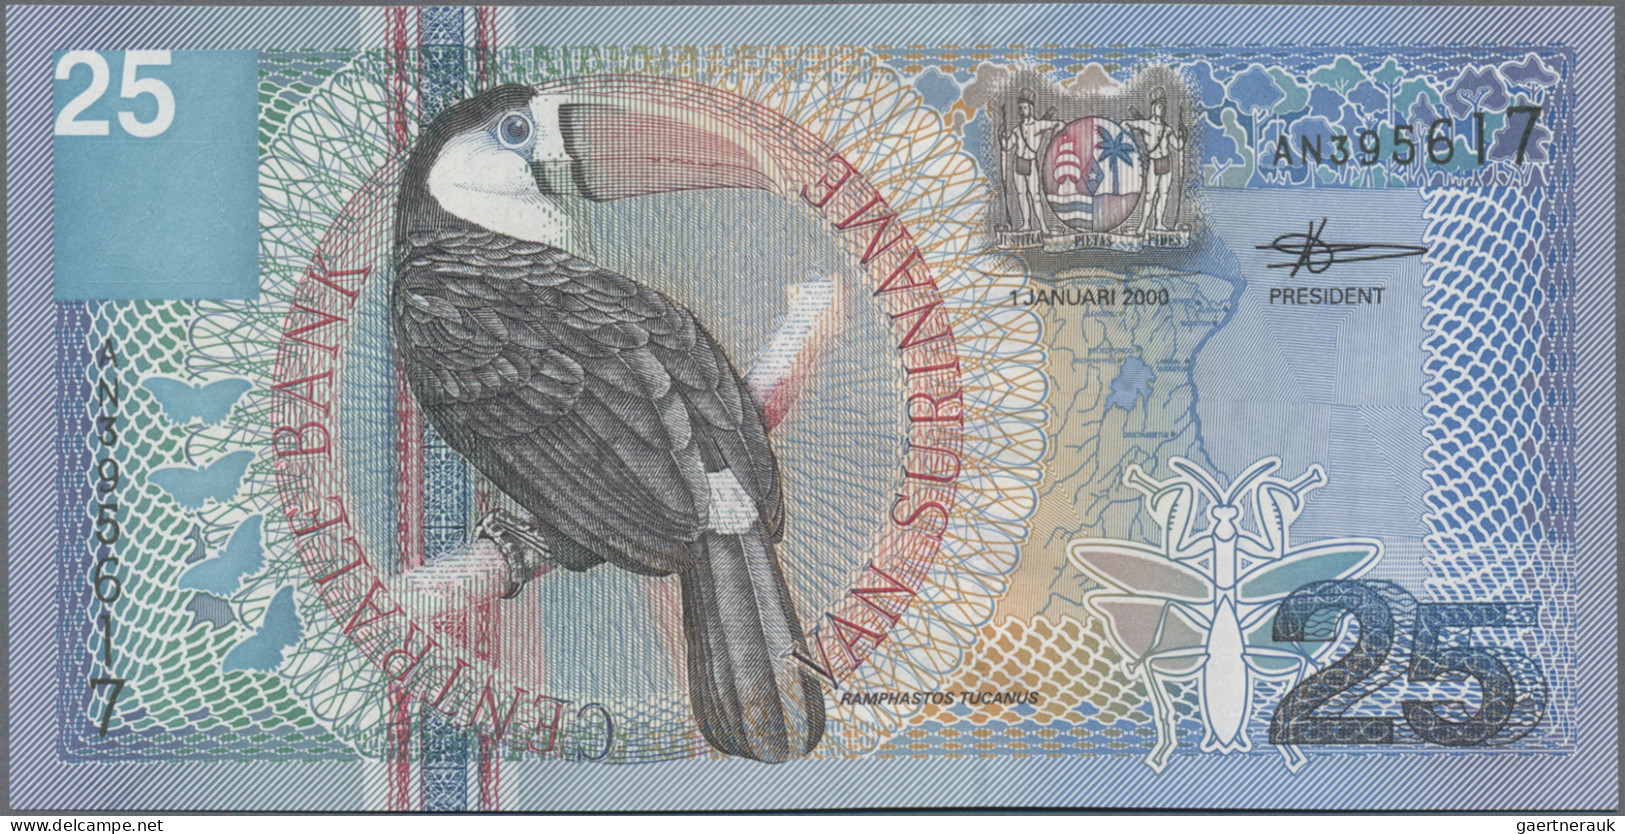 Suriname: Central Bank van Suriname, complete set of the animal series 2000, wit